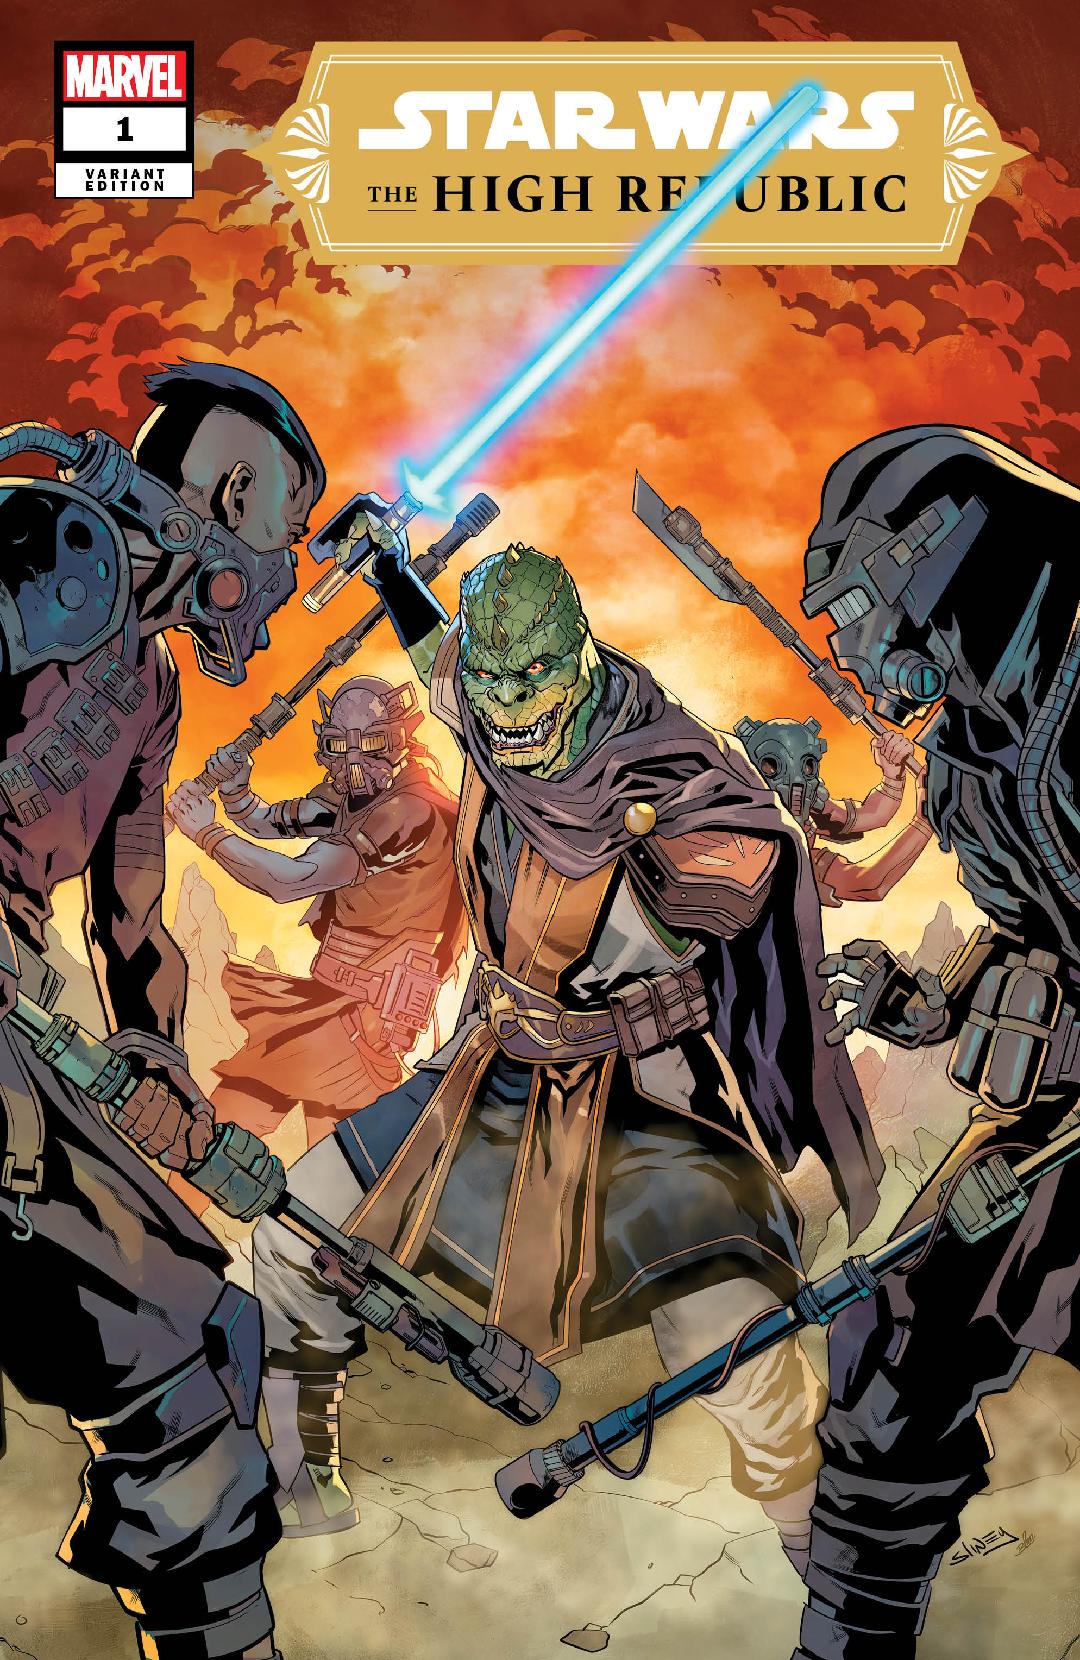 Star Wars No 5/1999 limited Another universe.com VARIANT COVER EDITION 